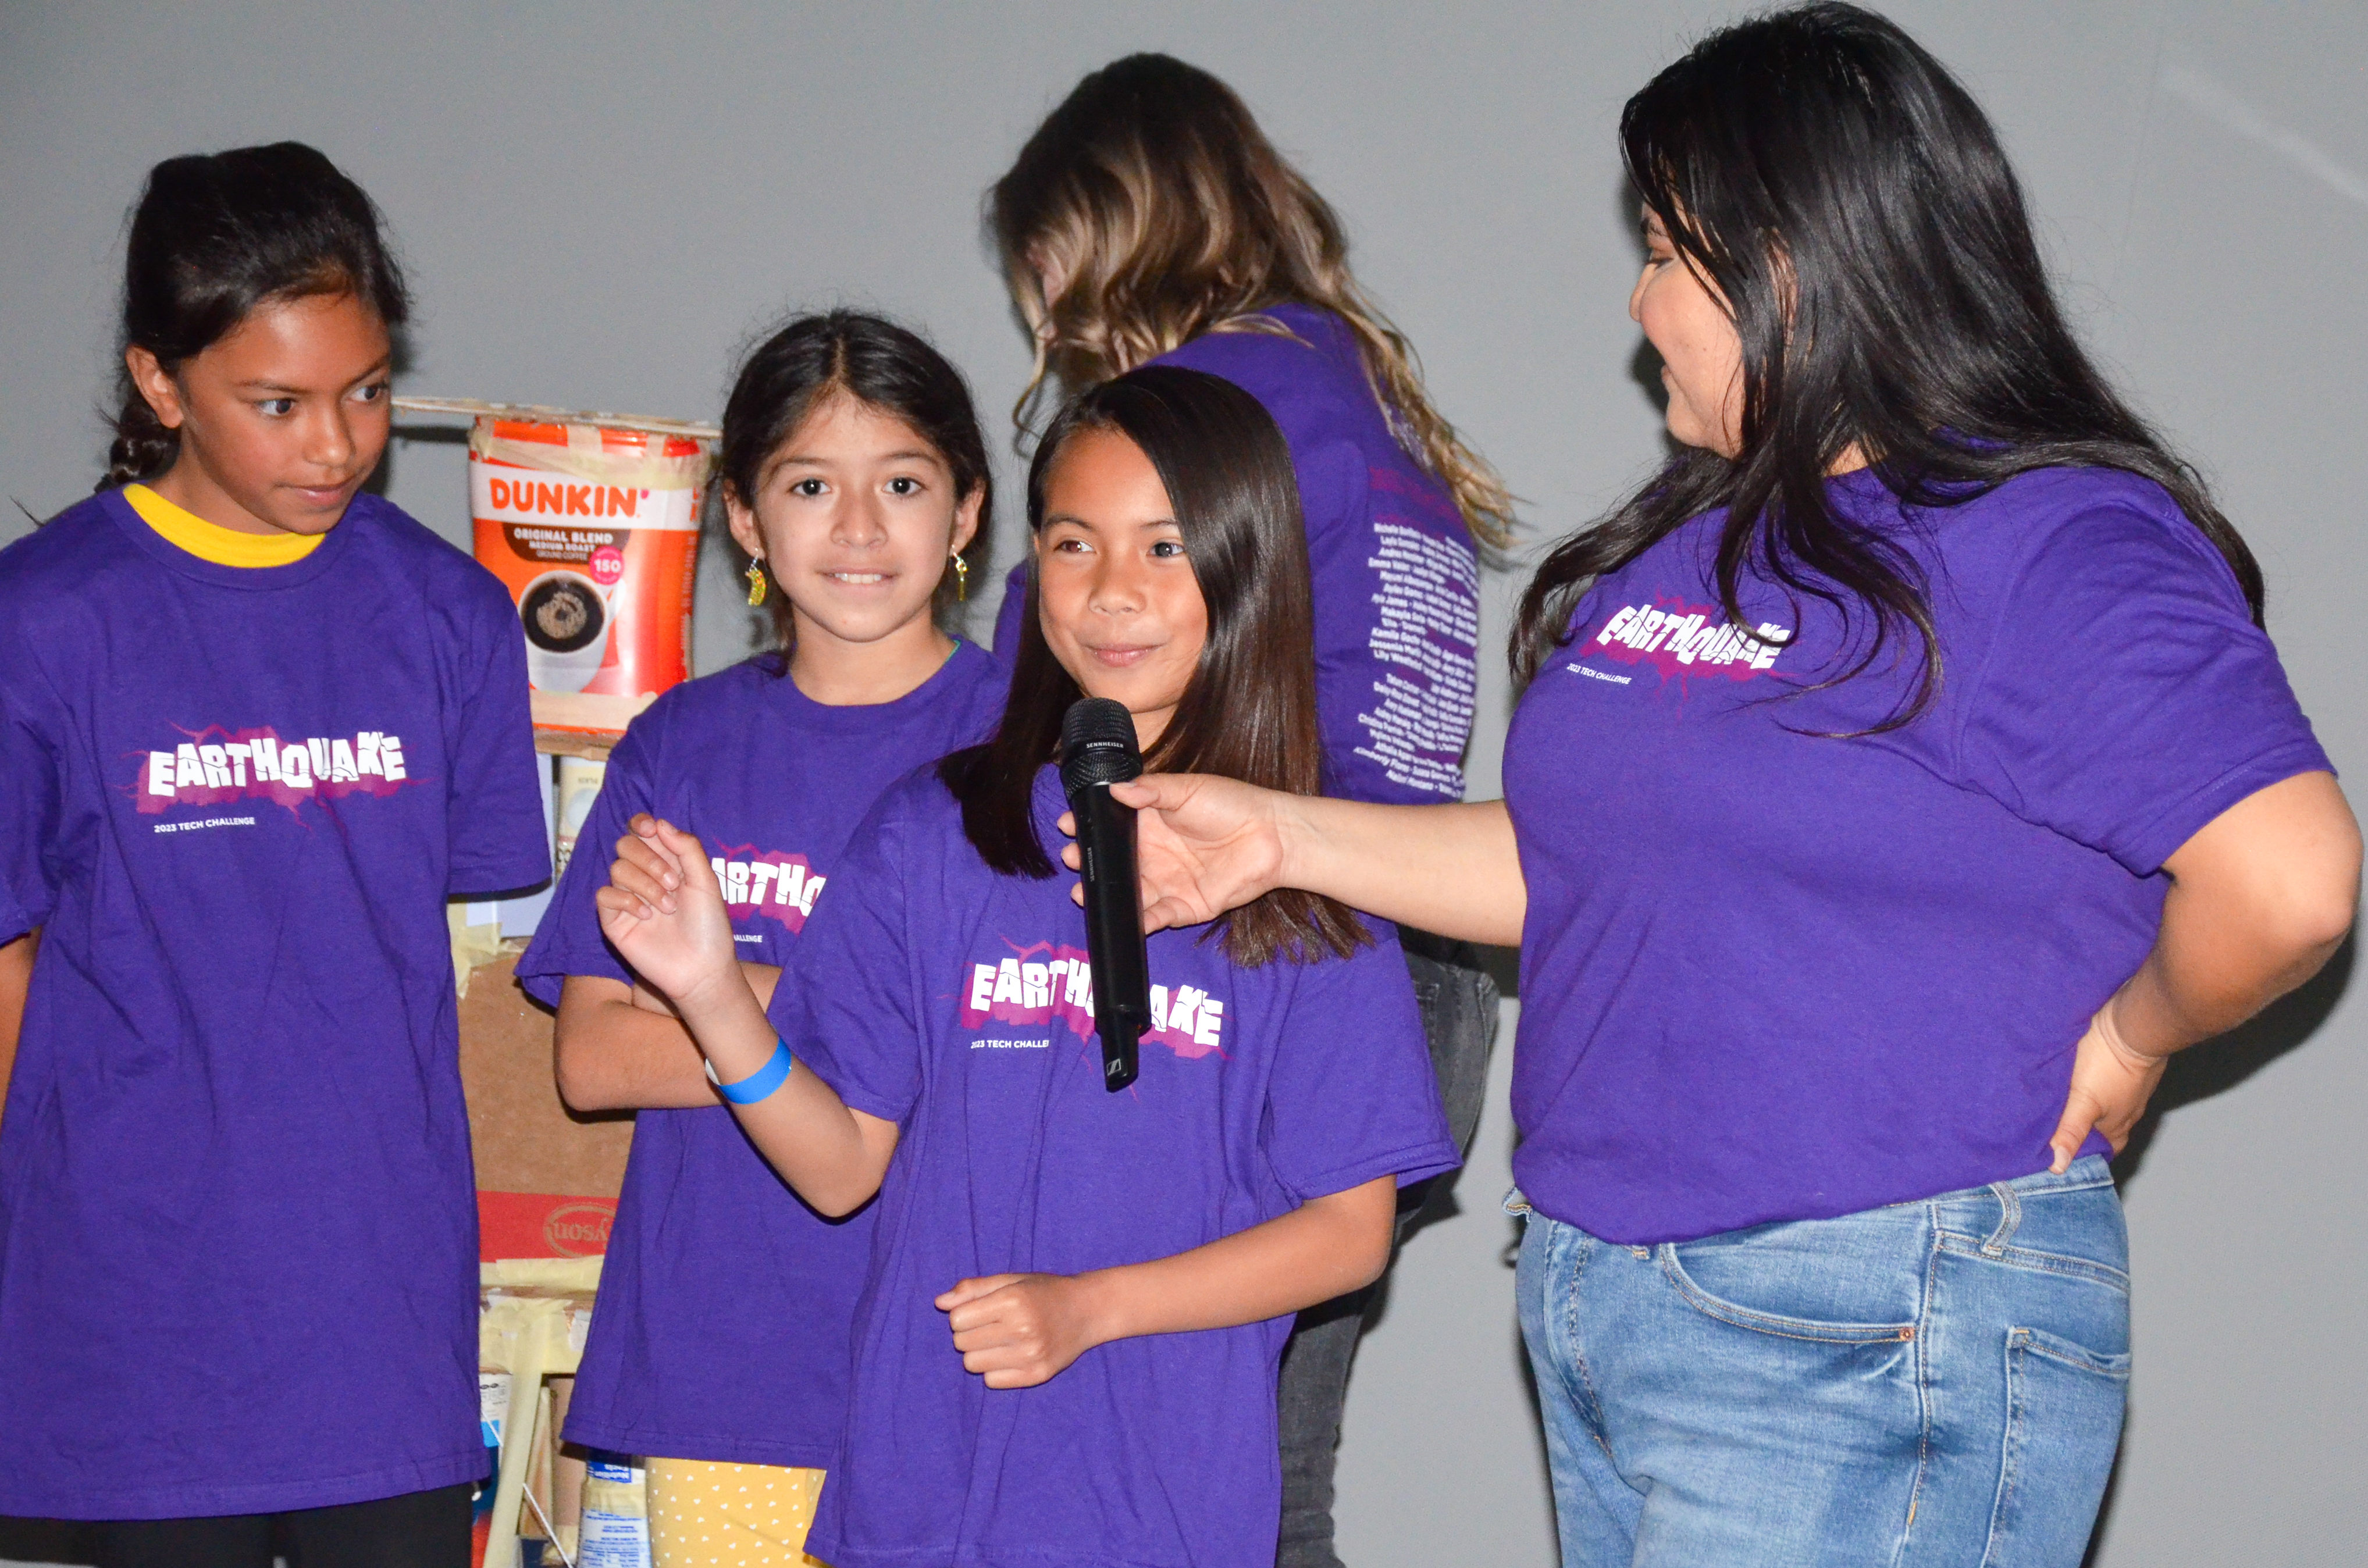 A young woman in a purple t-shirt interviews with a microphone three girls in purple t-shirts while another young woman is in the background. 